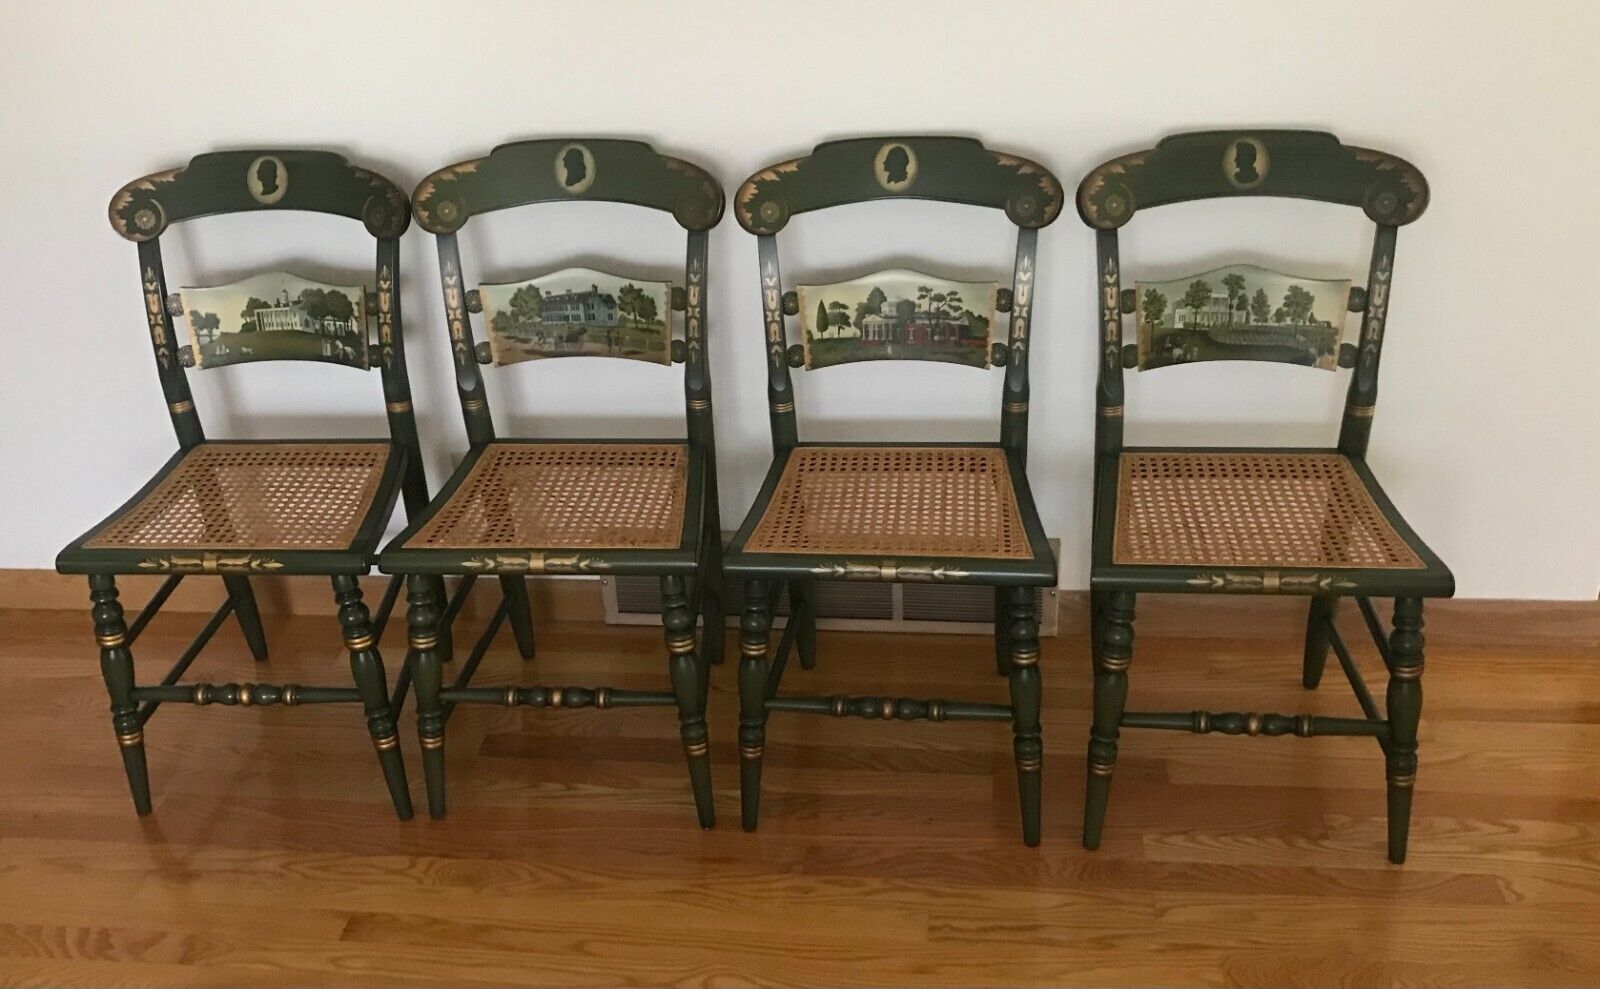 Set of 4 Hitchcock Chair Ltd Edition Bicentennial Presidents Cane Seat Green Hitchcock